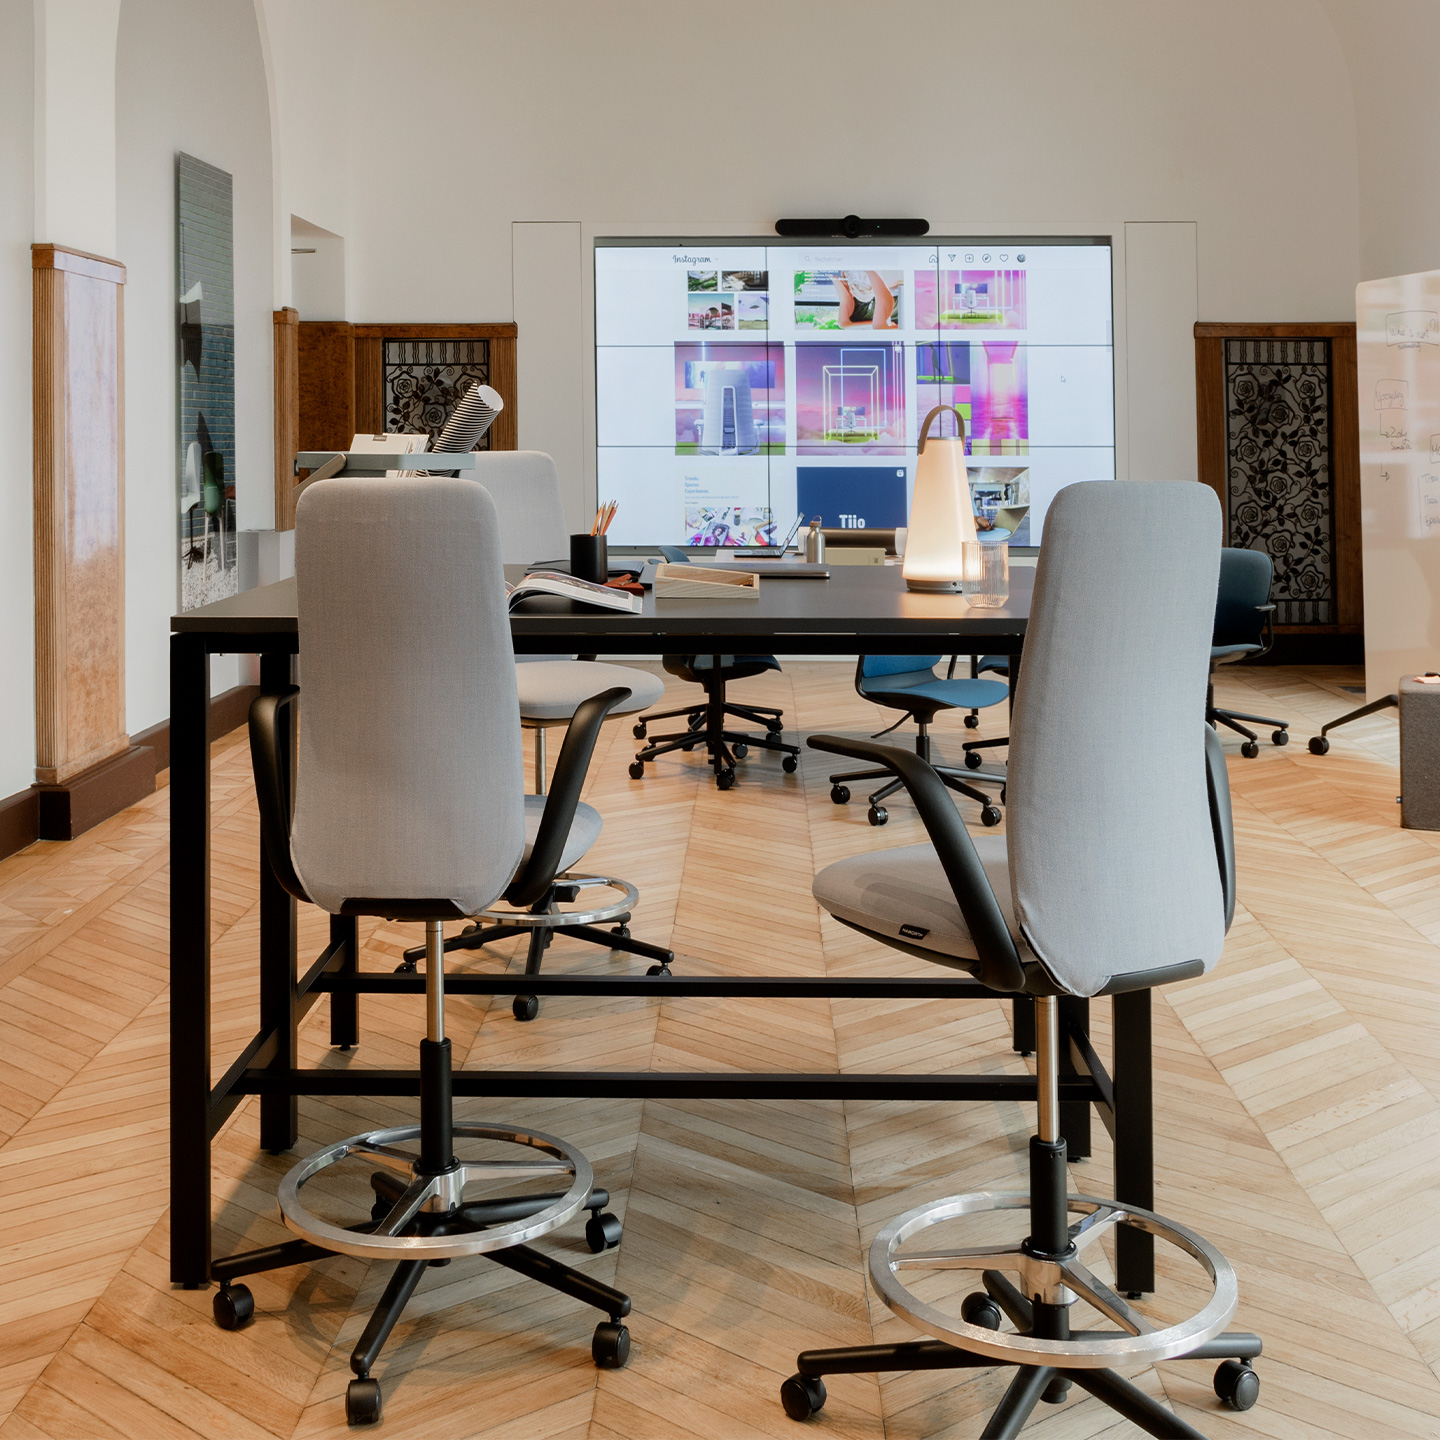 Nia Stool is an alternative to a task chair in an agile work environment, providing ergonomics features and comfort